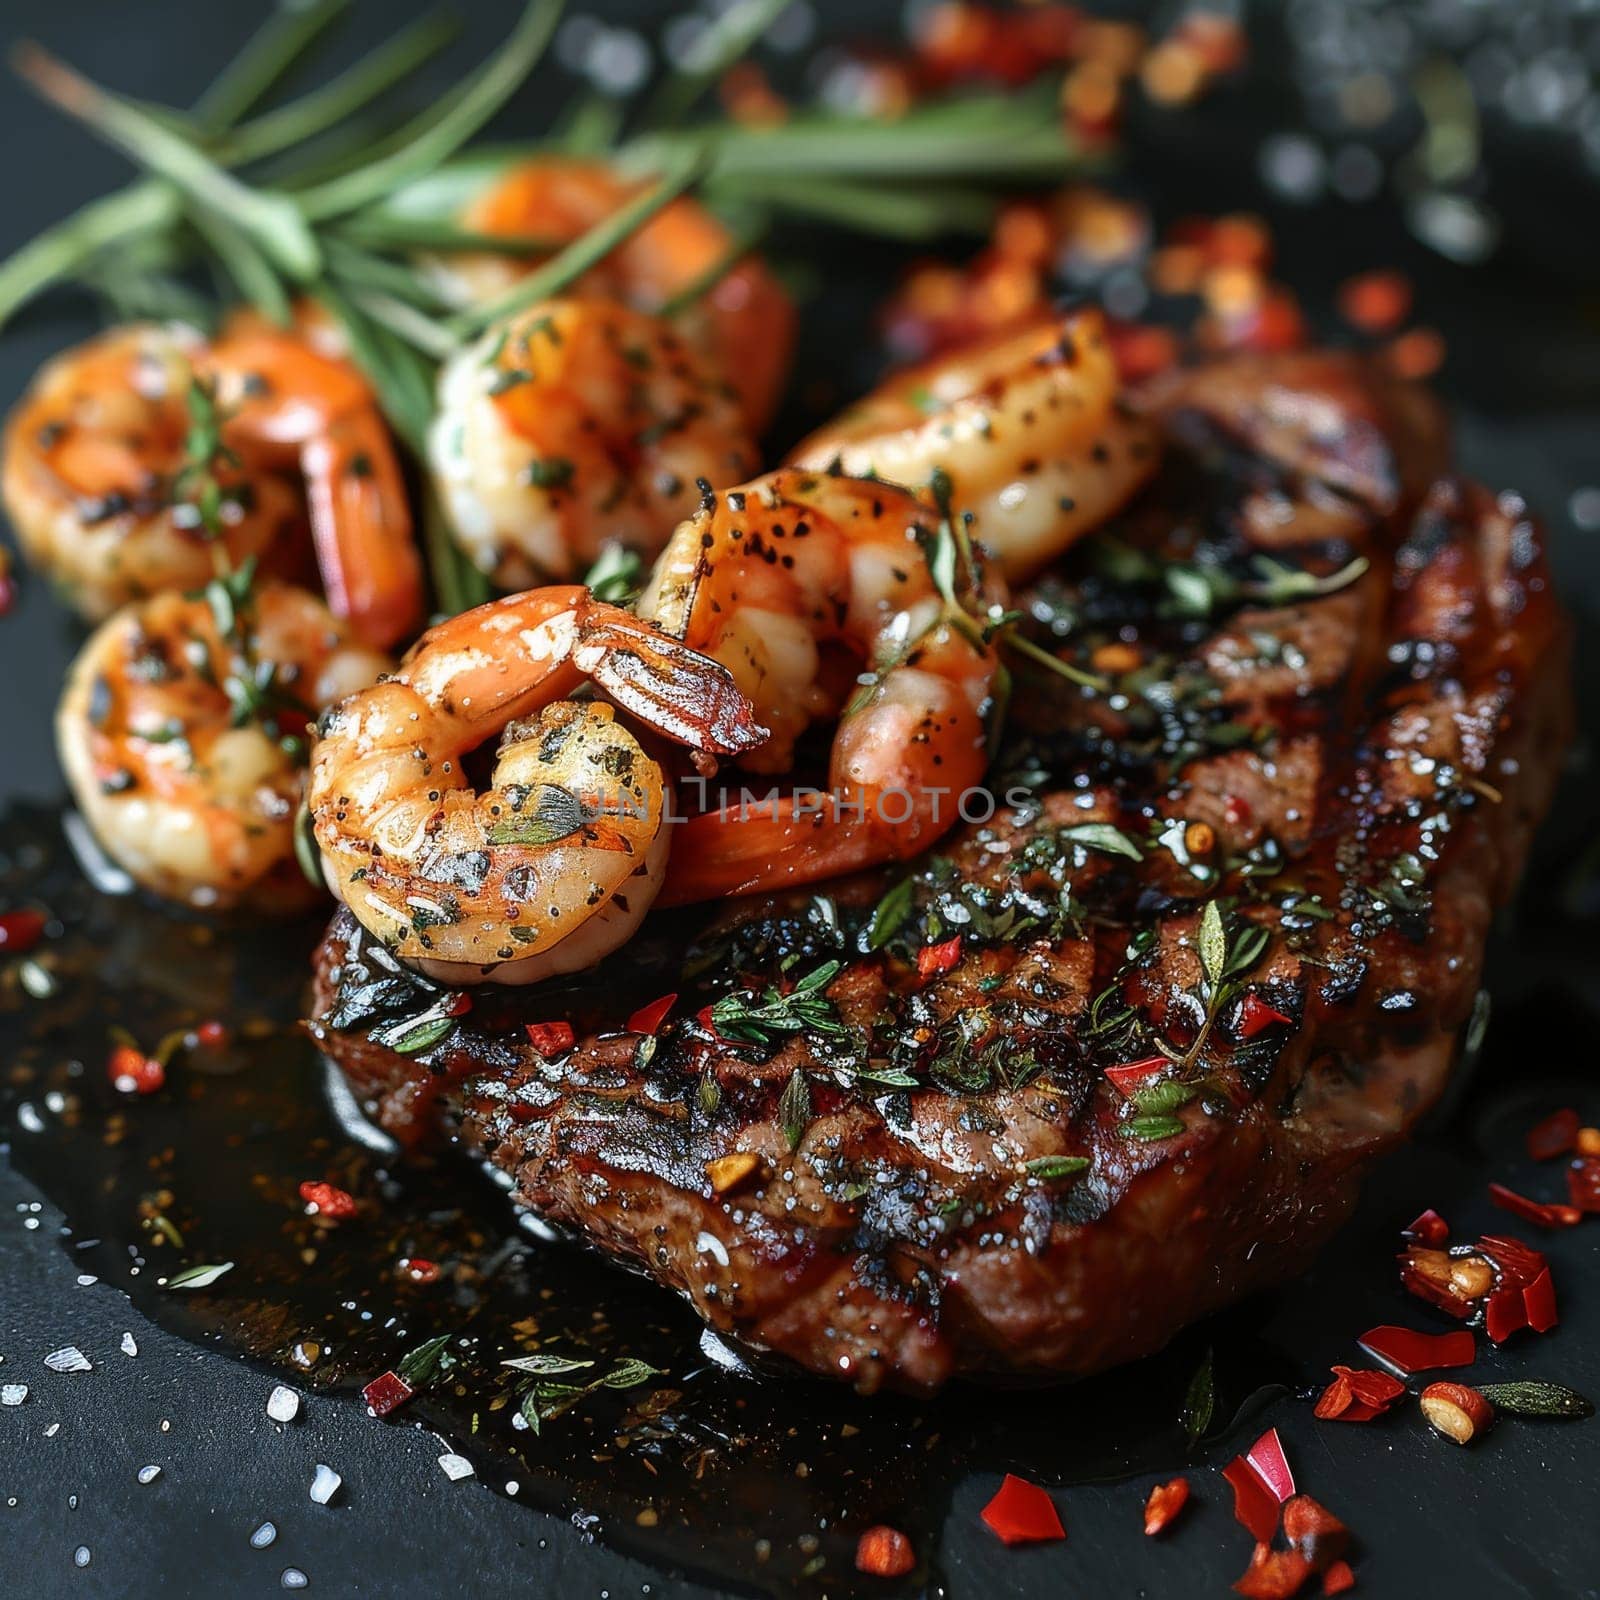 A plate of food with a steak and shrimp on it. The steak is cooked medium rare and the shrimp is grilled. The plate is set on a black table